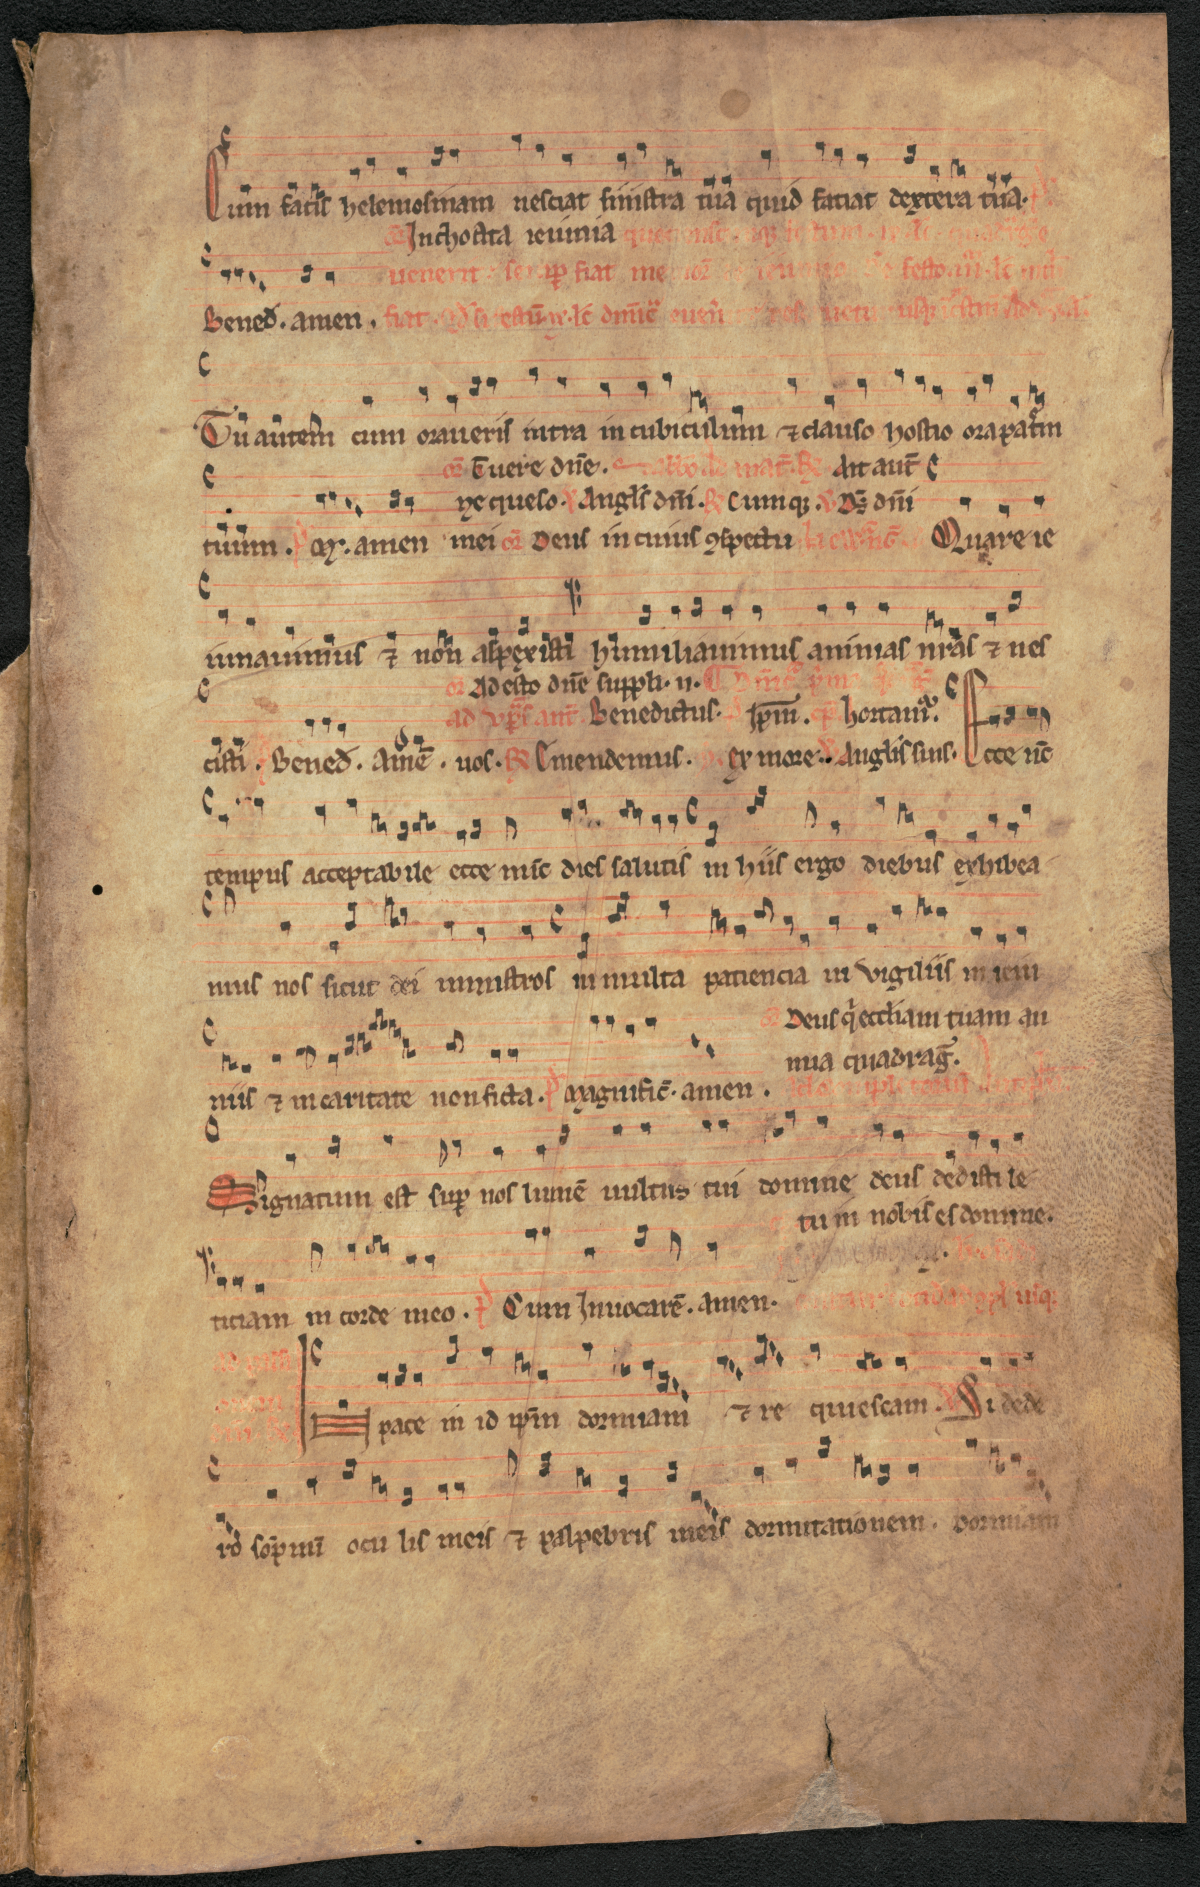 A detail of an old handwritten document with musical notation. The lyrics are written in red and black ink. The notation is in black.